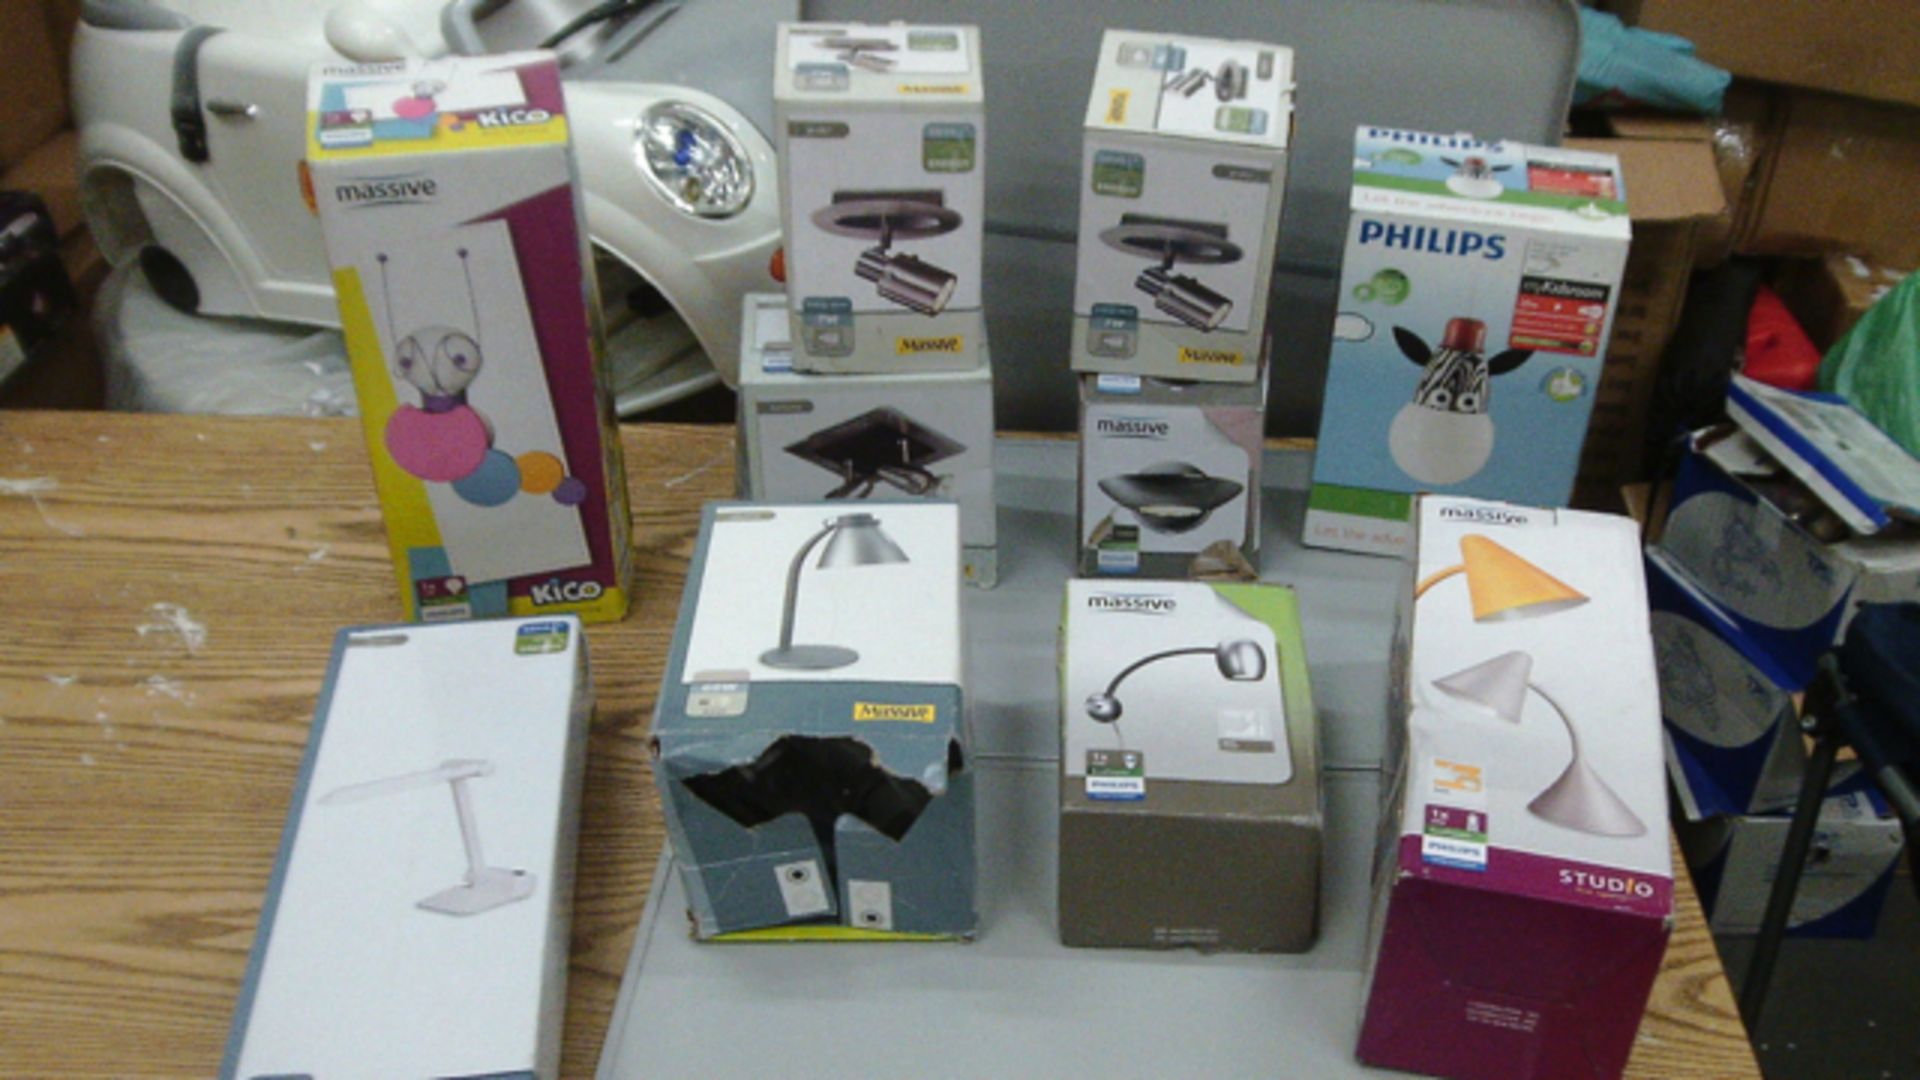 Selection of Philips lights to include all items pictured - brand new most include bulbs - high